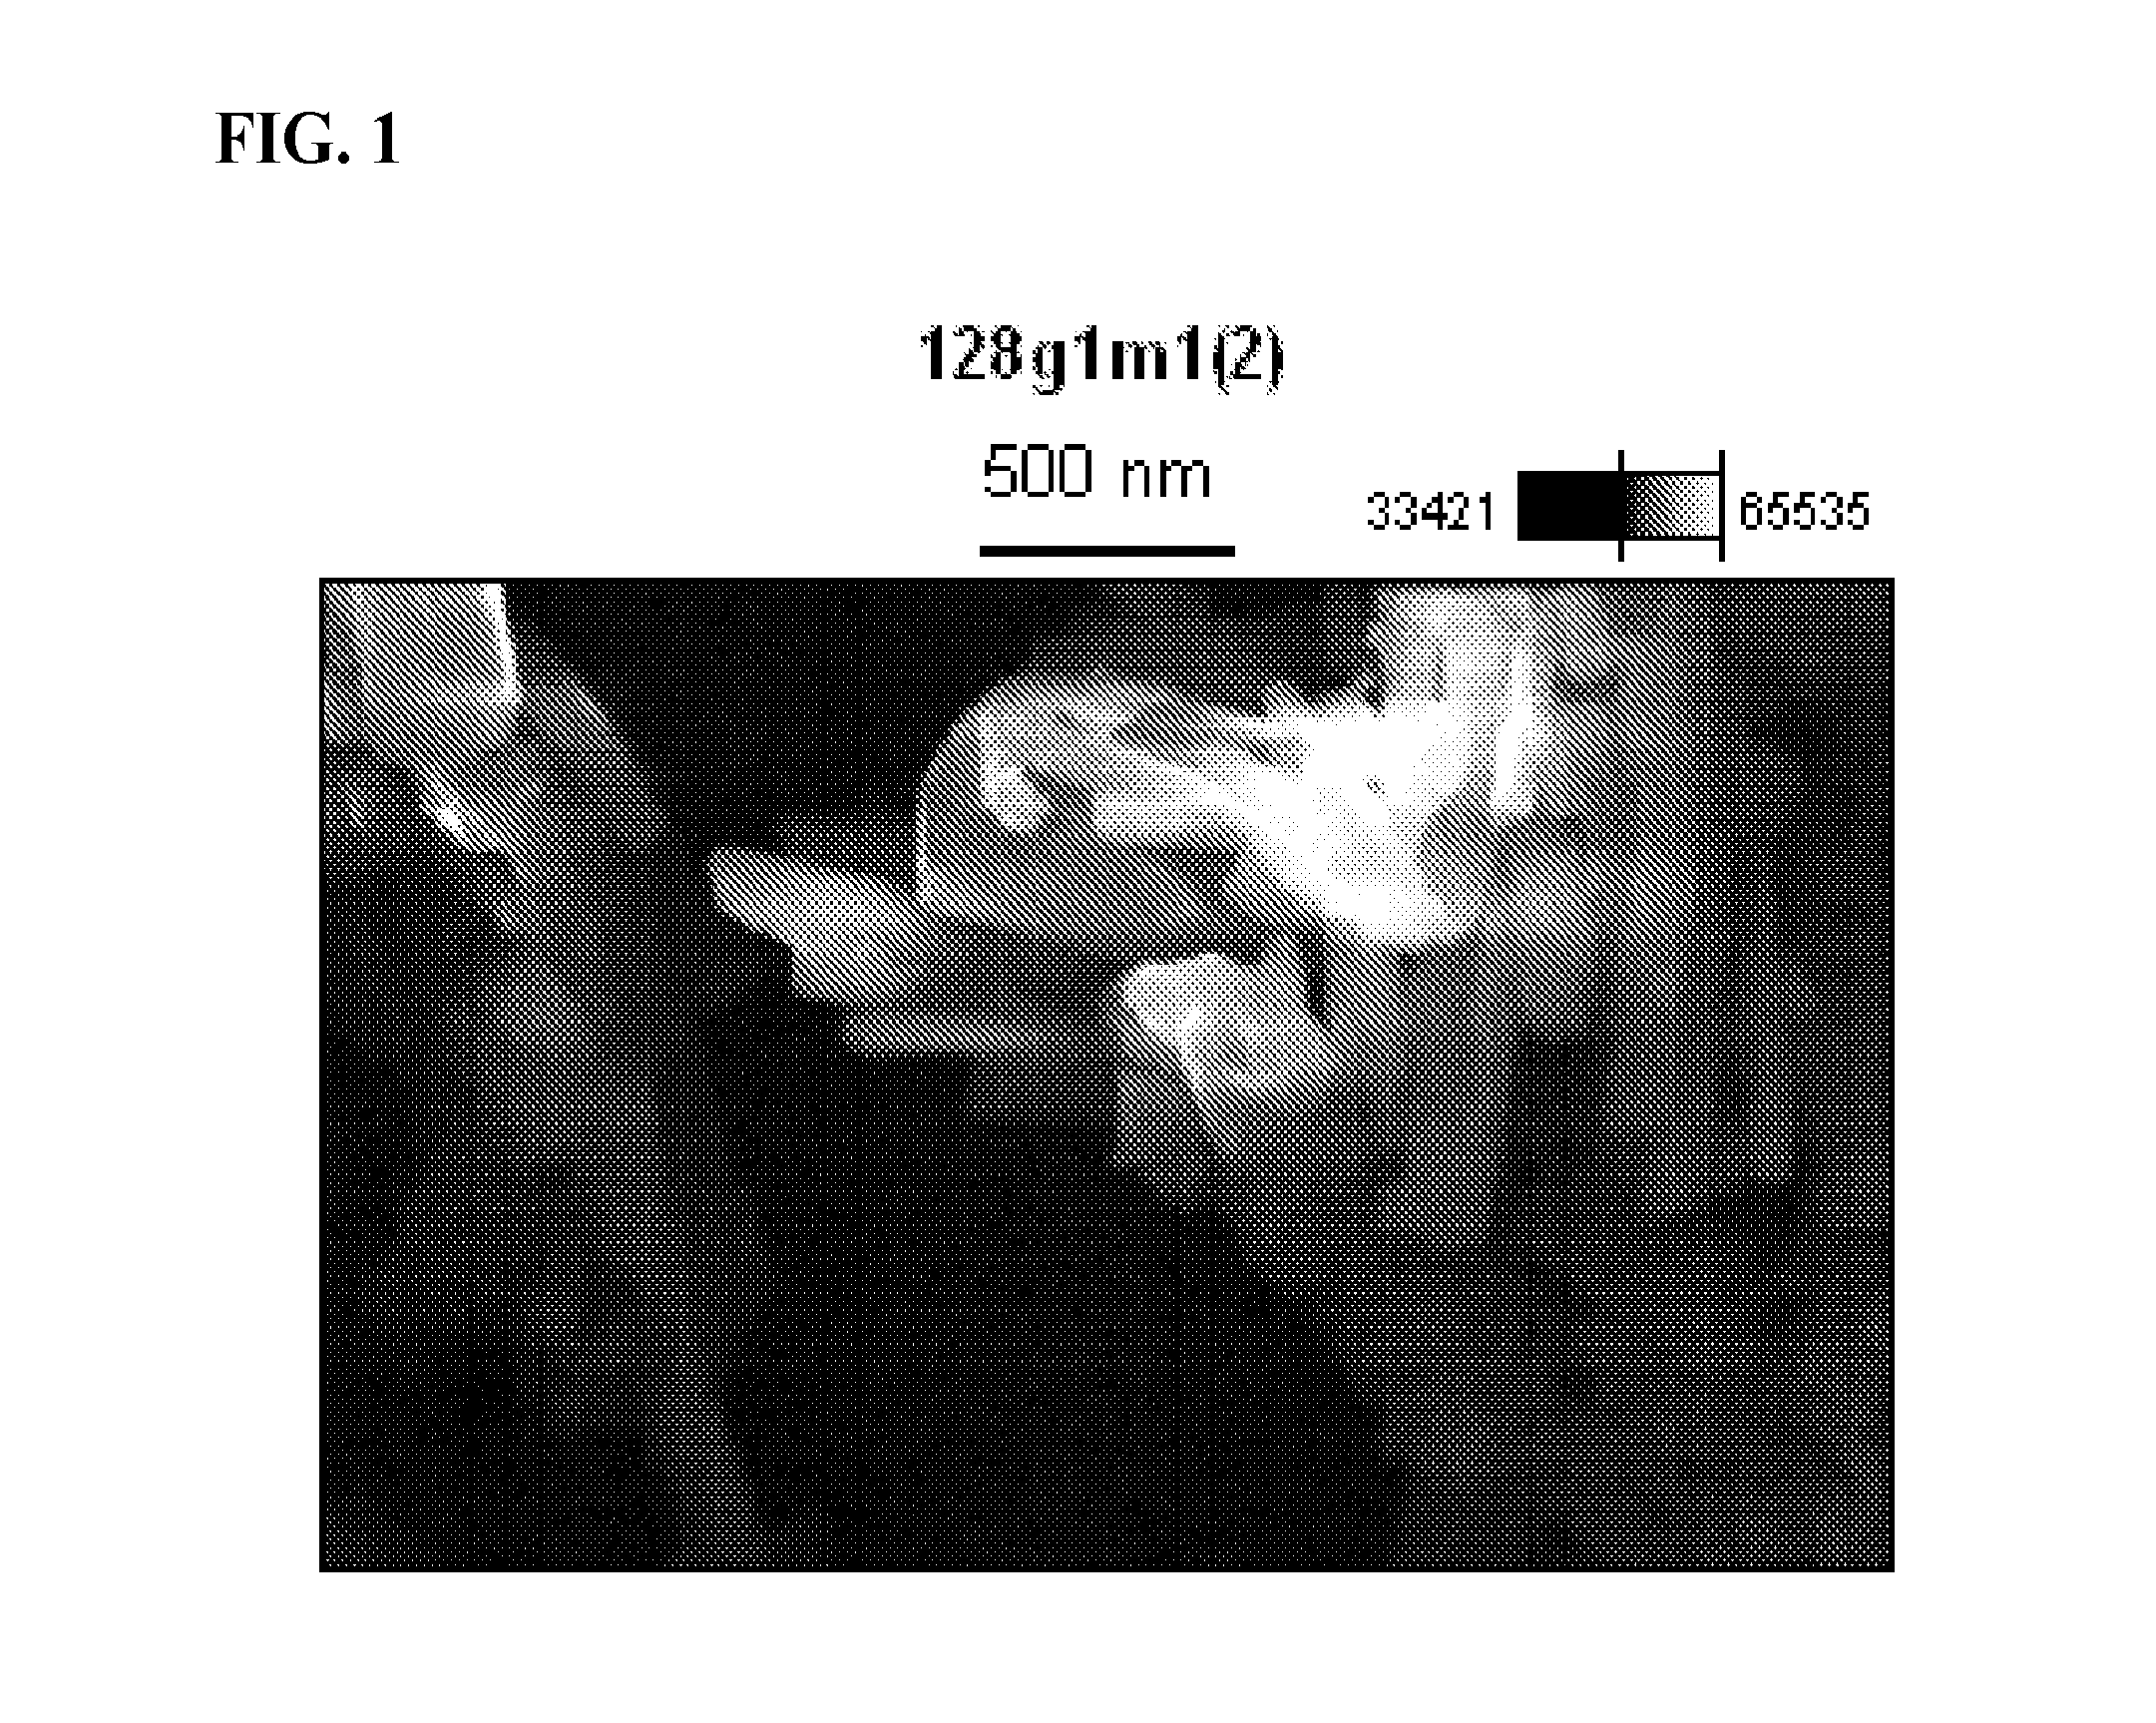 Chlorobis copper (i) complex compositions and methods of manufacture and use